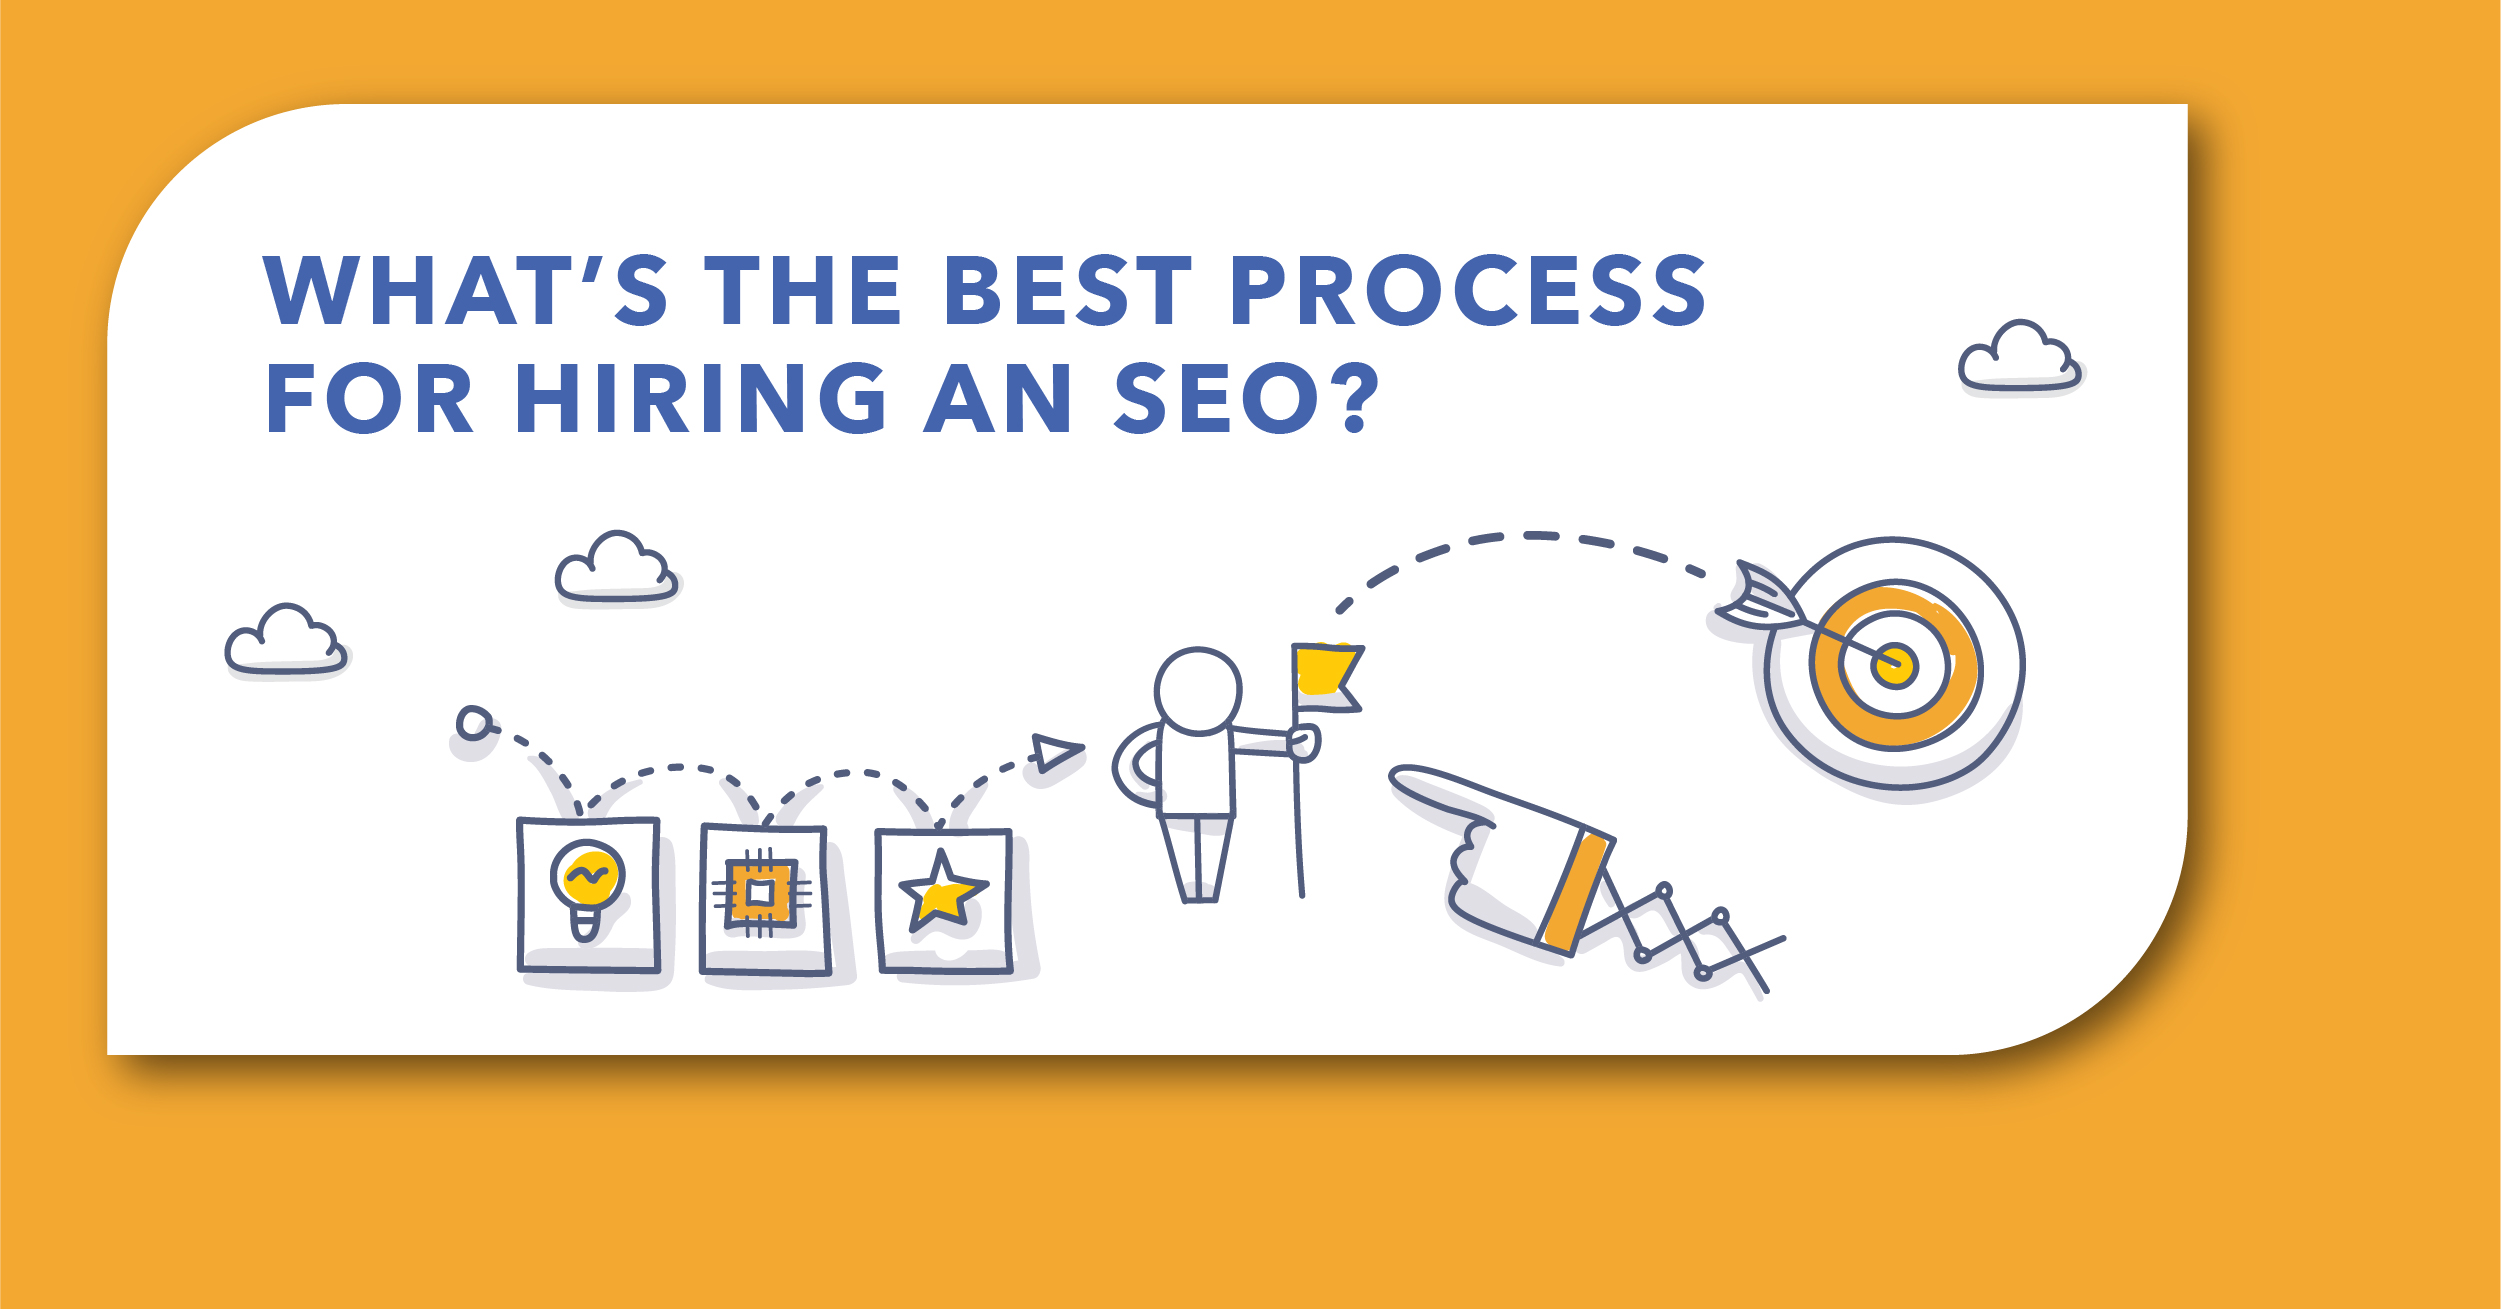 Hiring an Enterprise SEO Expert: Why, How, & the Cost